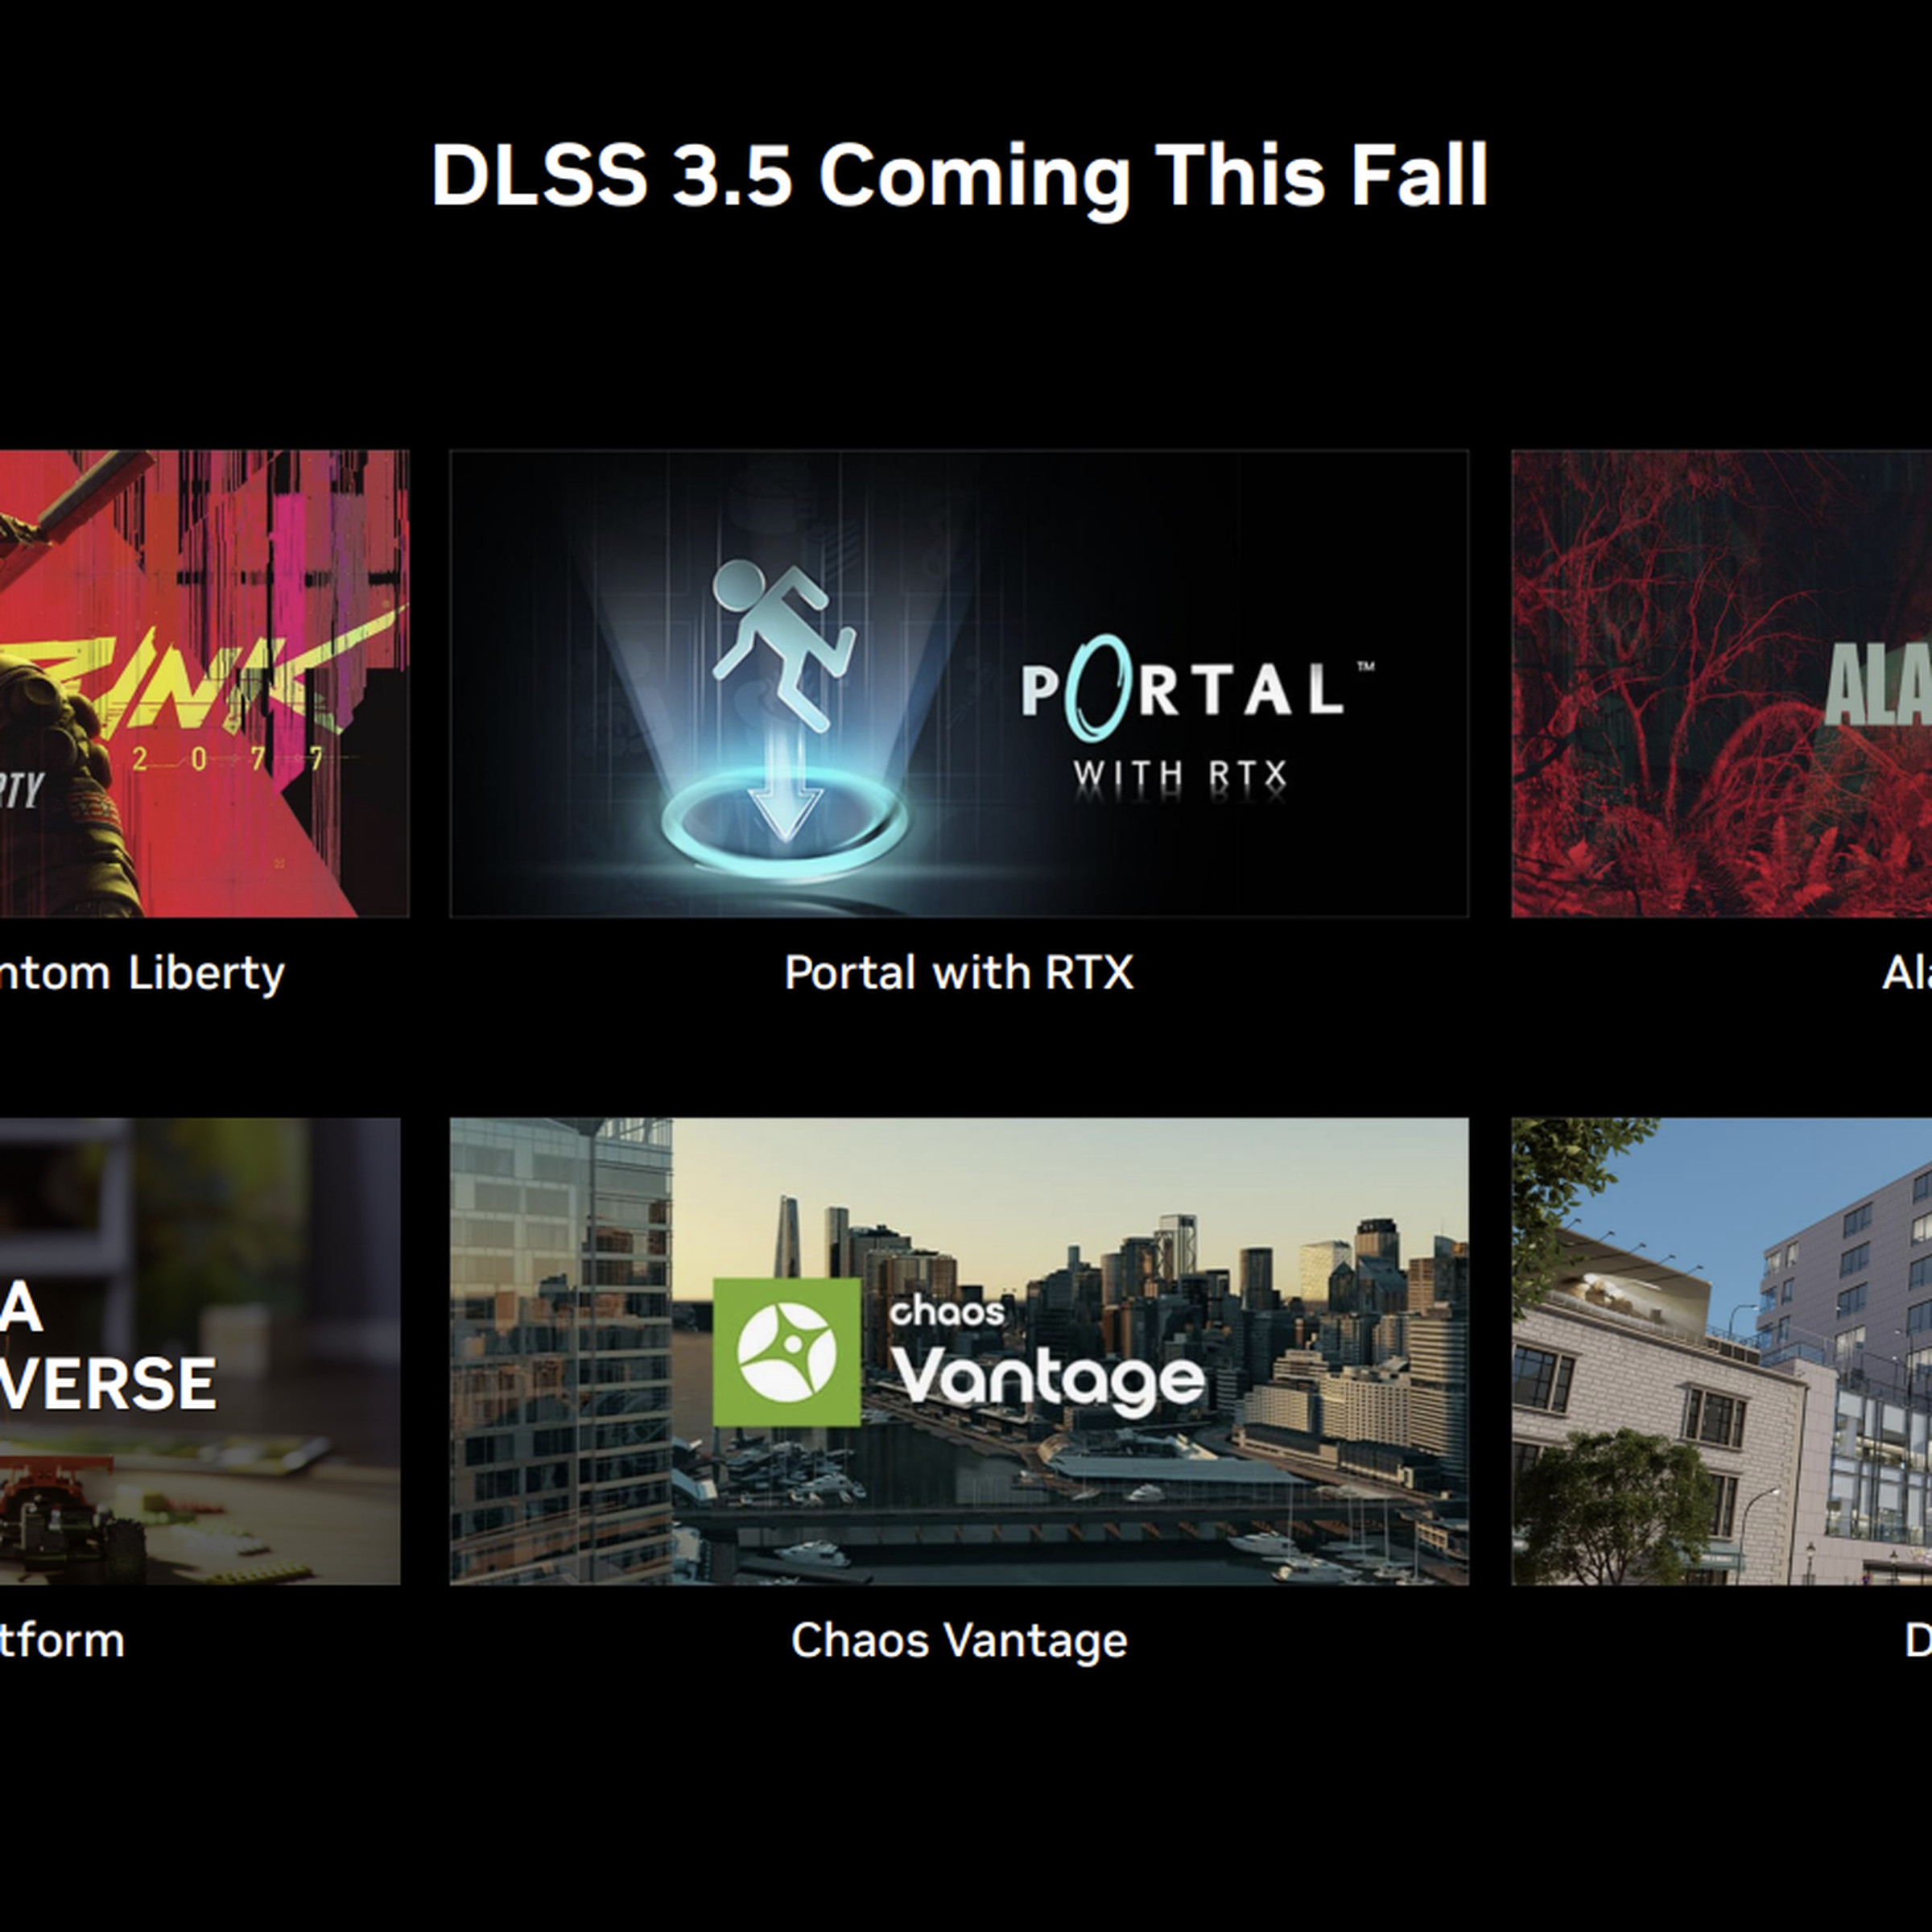 Several games are getting DLSS 3.5 this fall